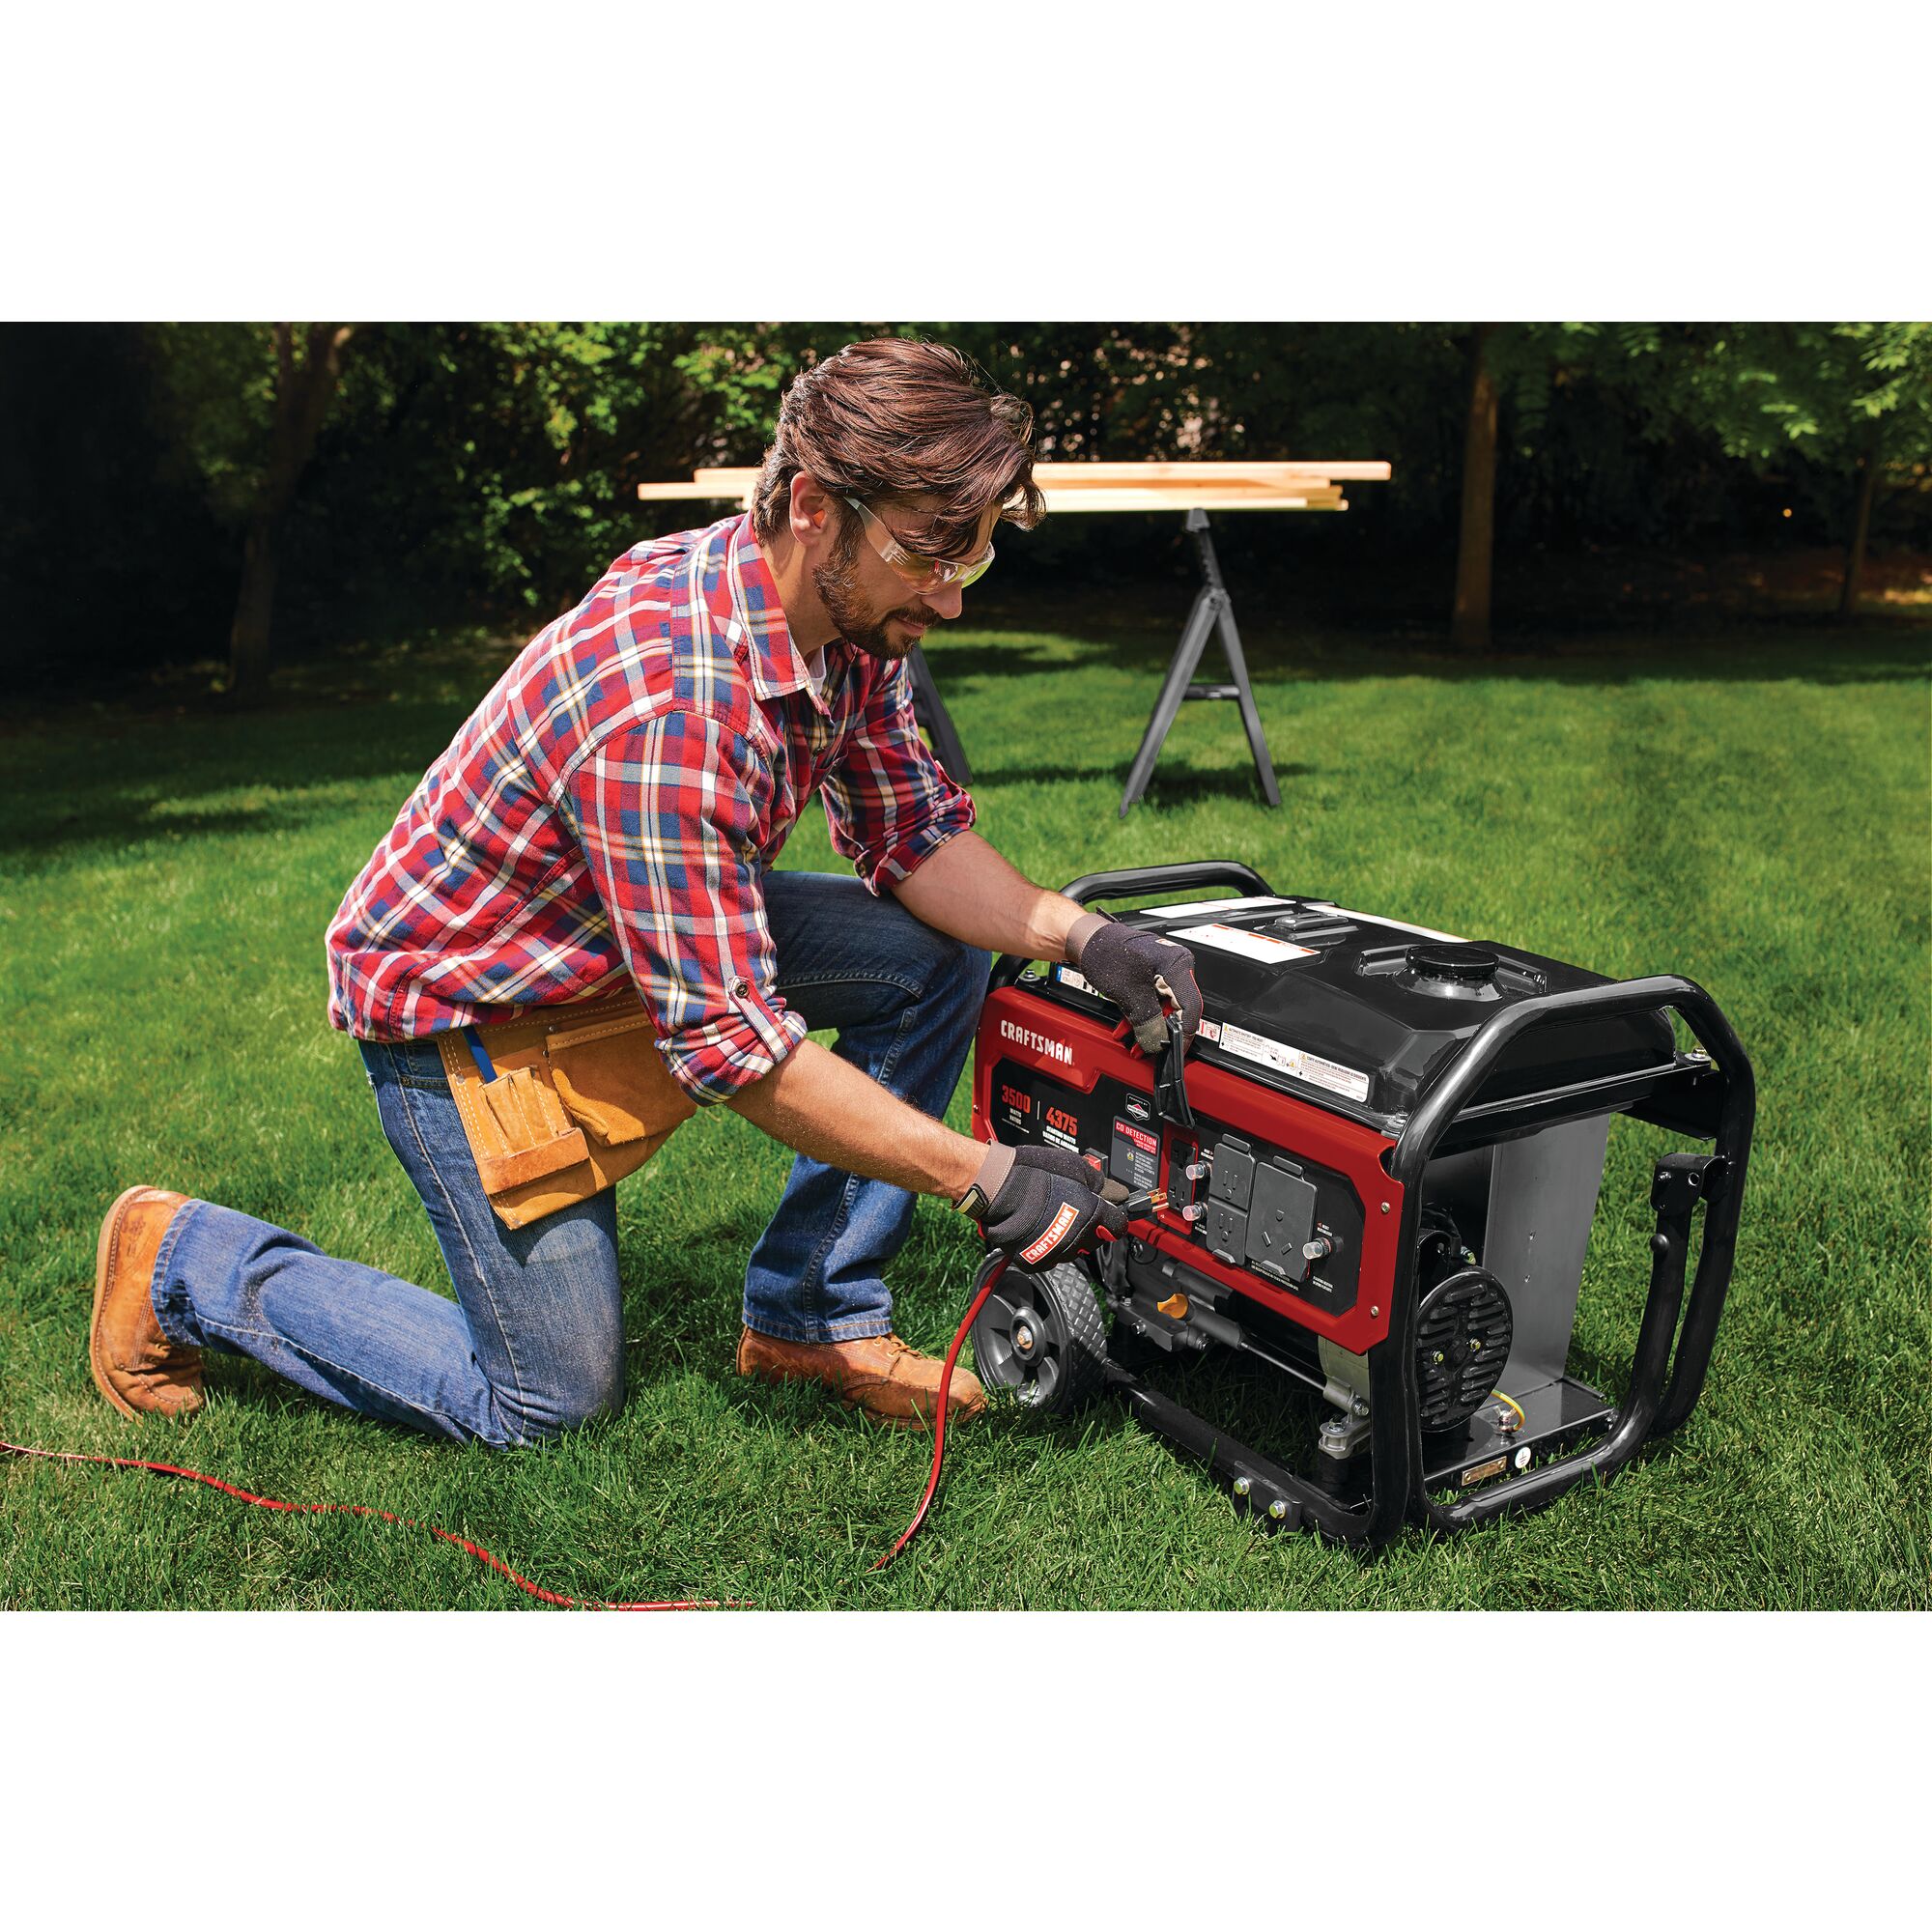 3500 watt portable generator being used by a person.